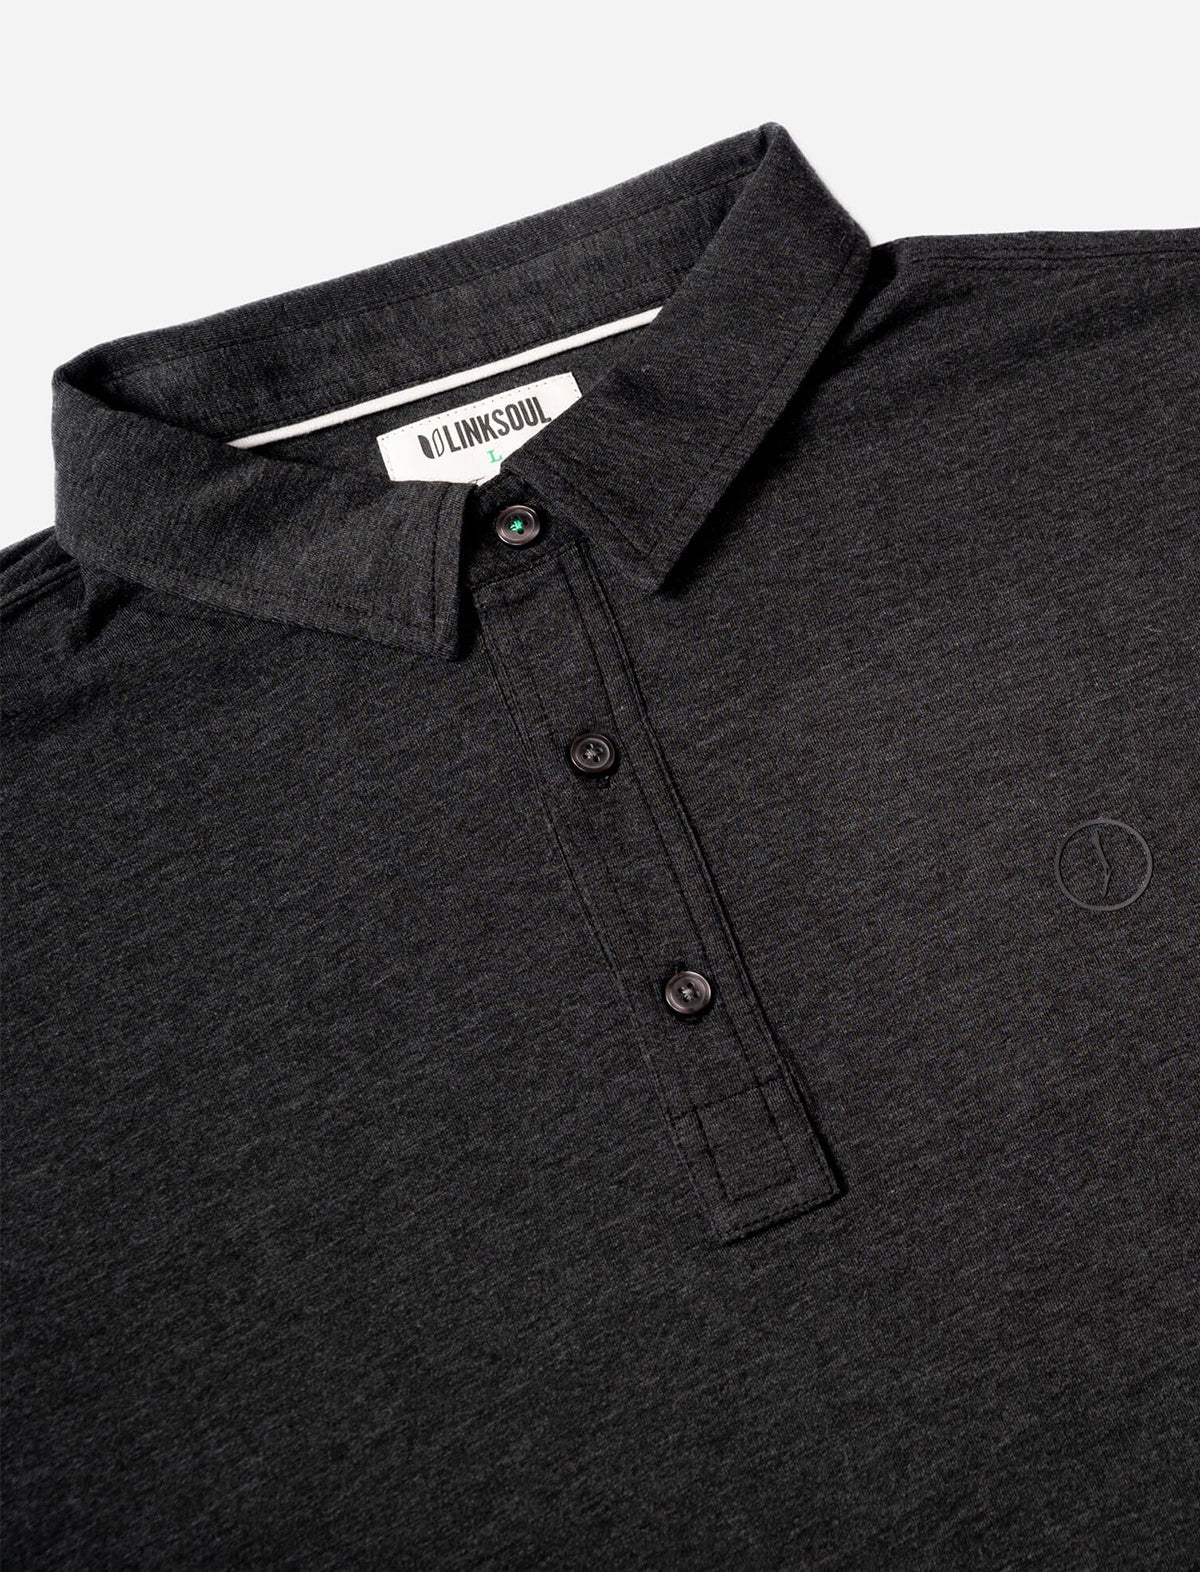 THE GOLFERS JOURNAL Circle Tee Drytech Polo Shirt in Black